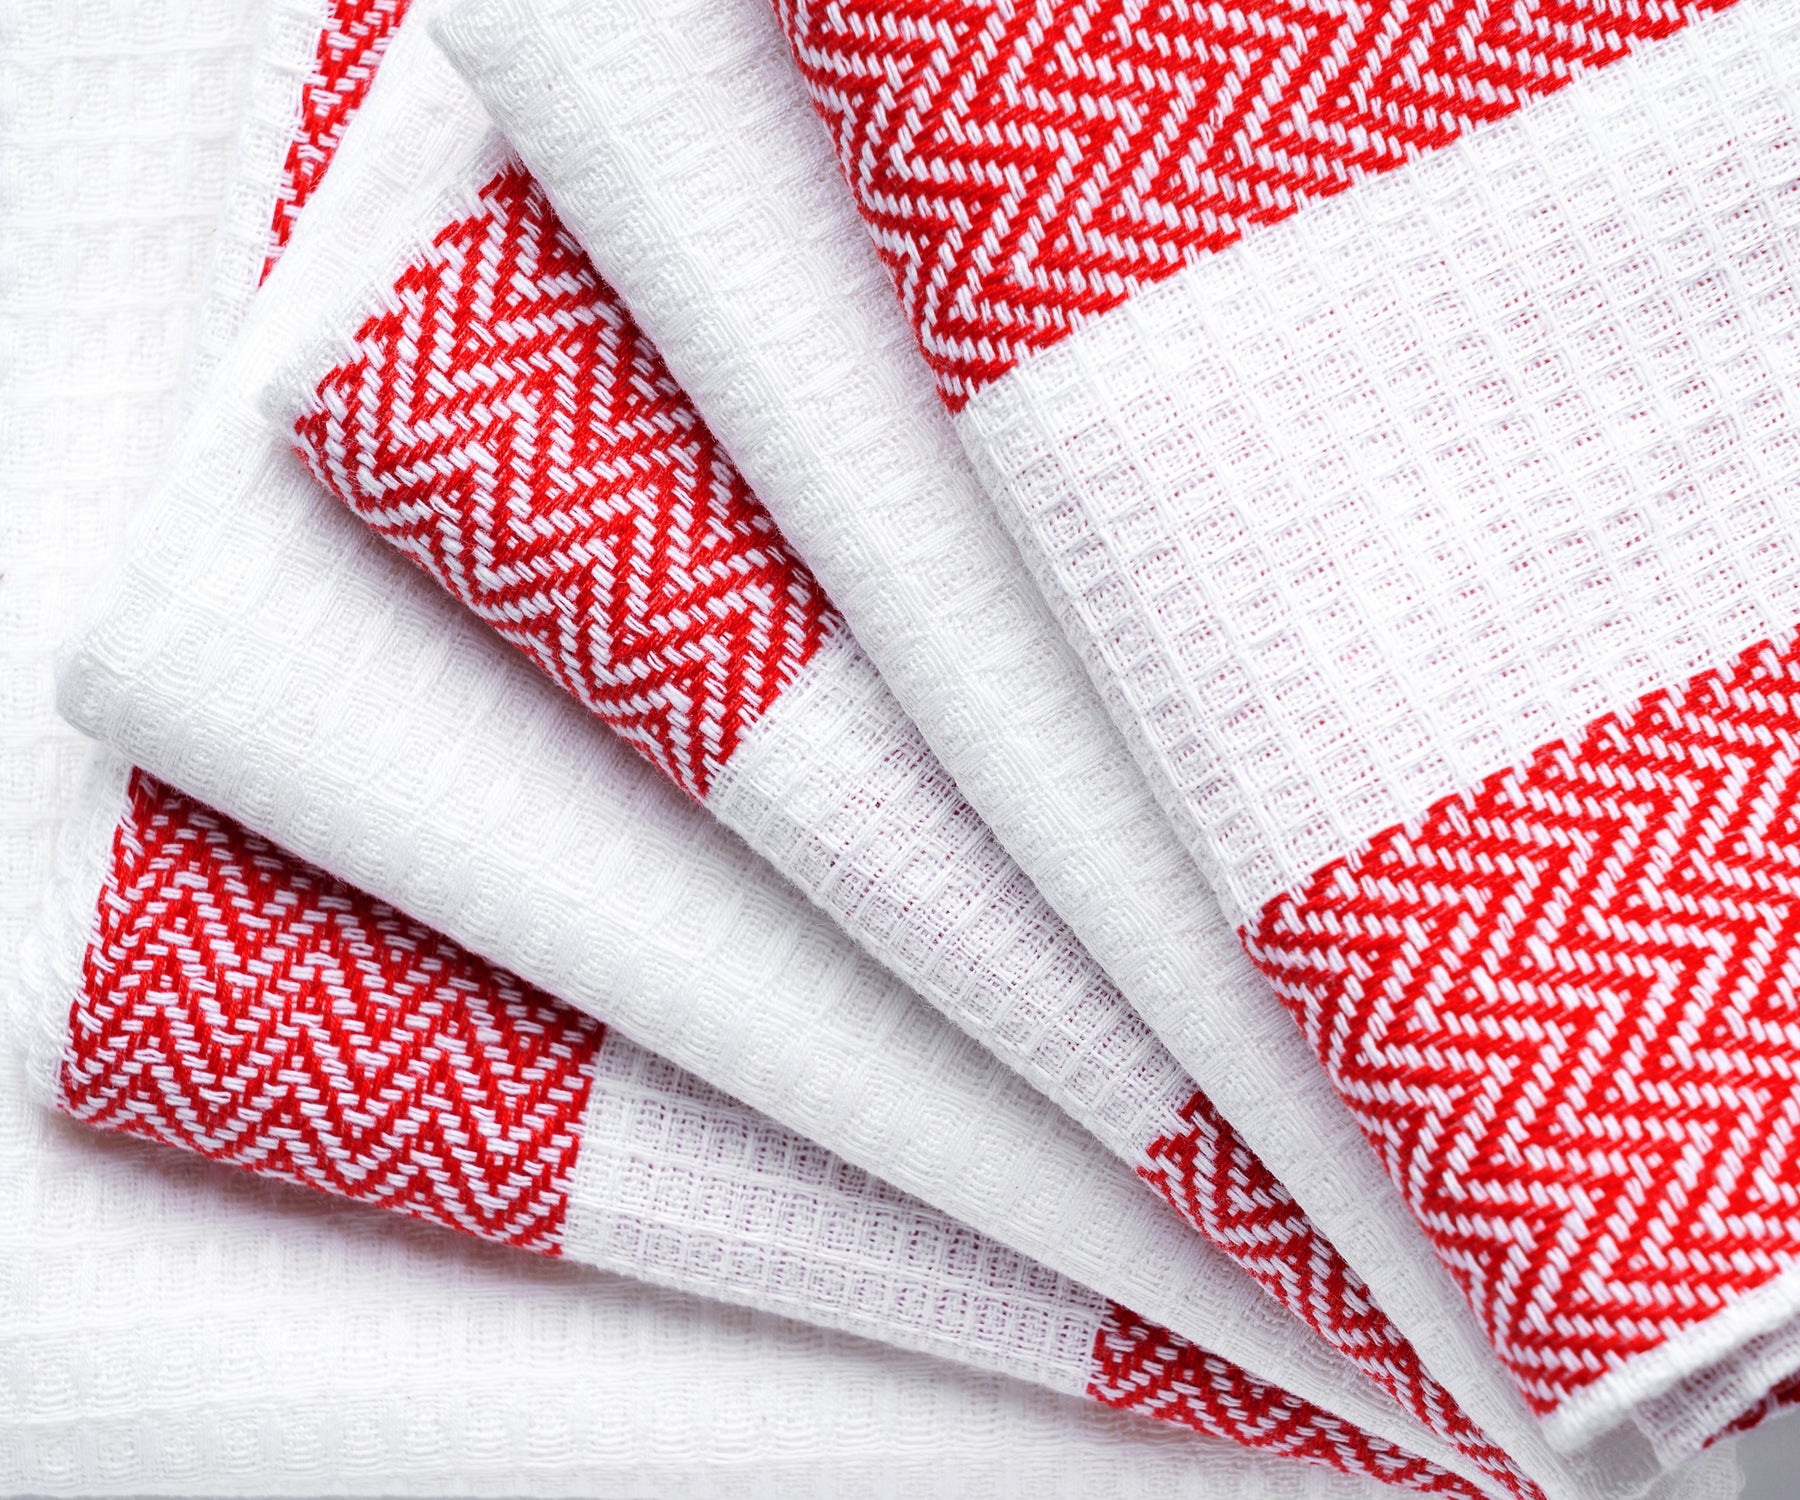 red and white dish towels cotton, cloth kitchen towels, dish towels and dishcloths sets, farmhouse kitchen towels.